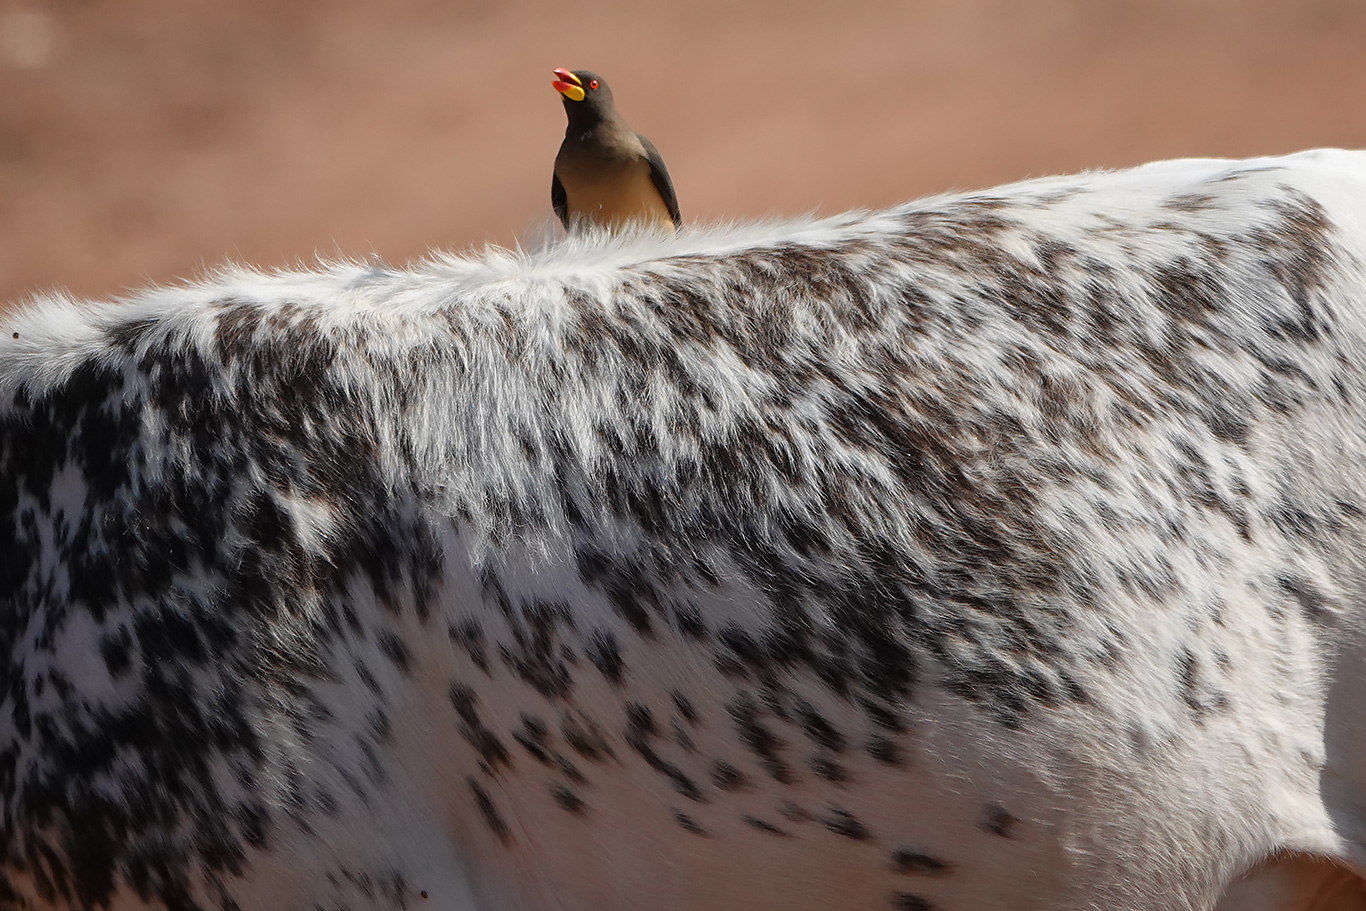 Yellow-billed Oxpecker, Pirang, The Gambia.